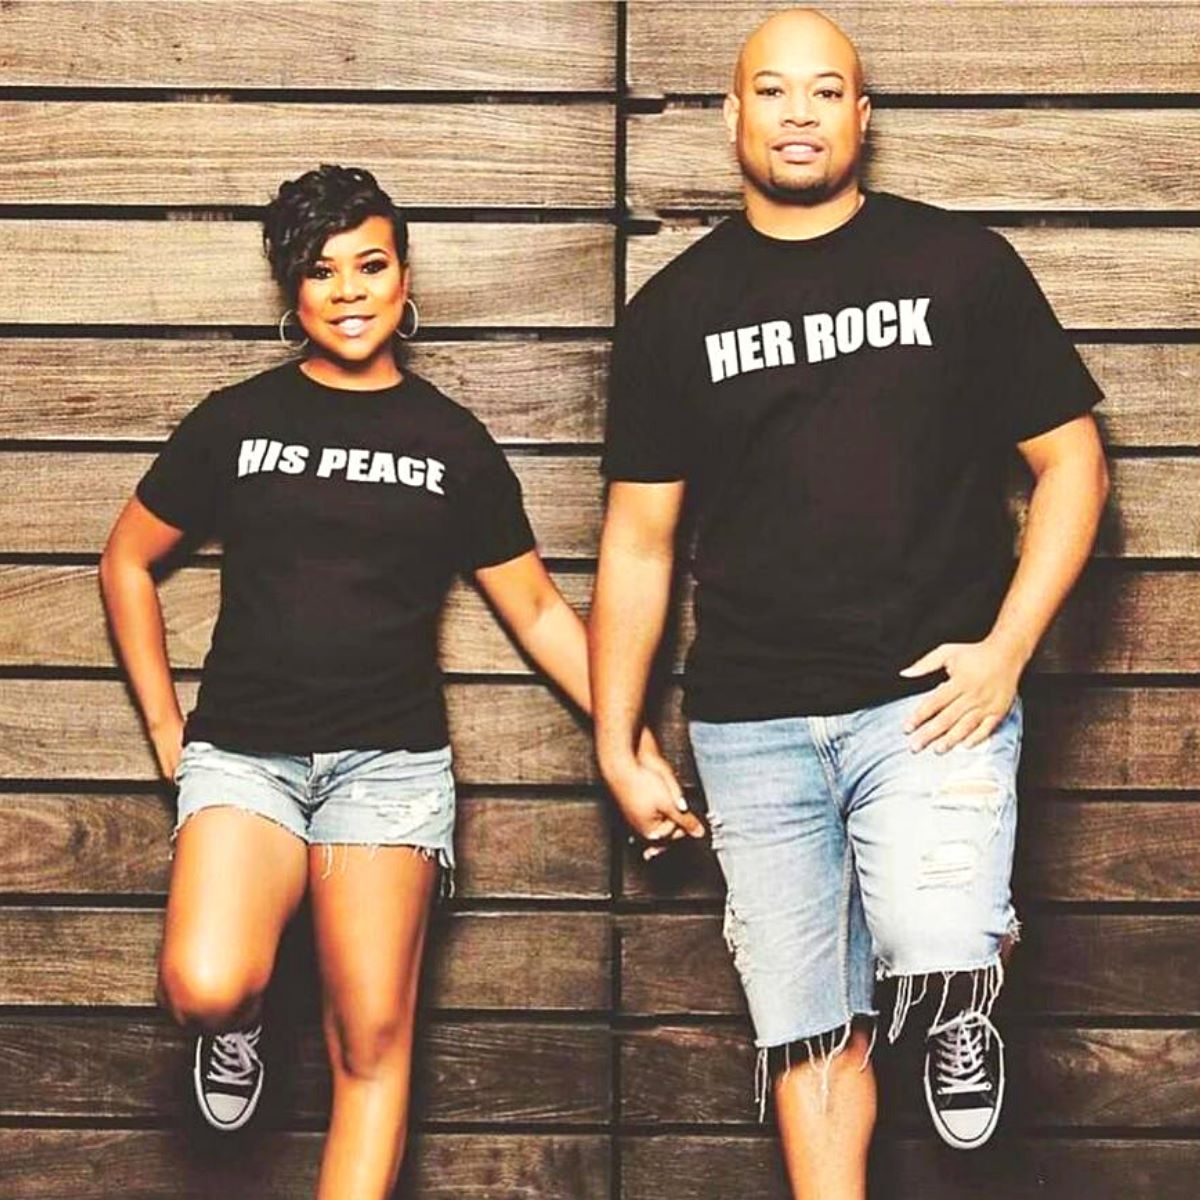 His peace. Her rock